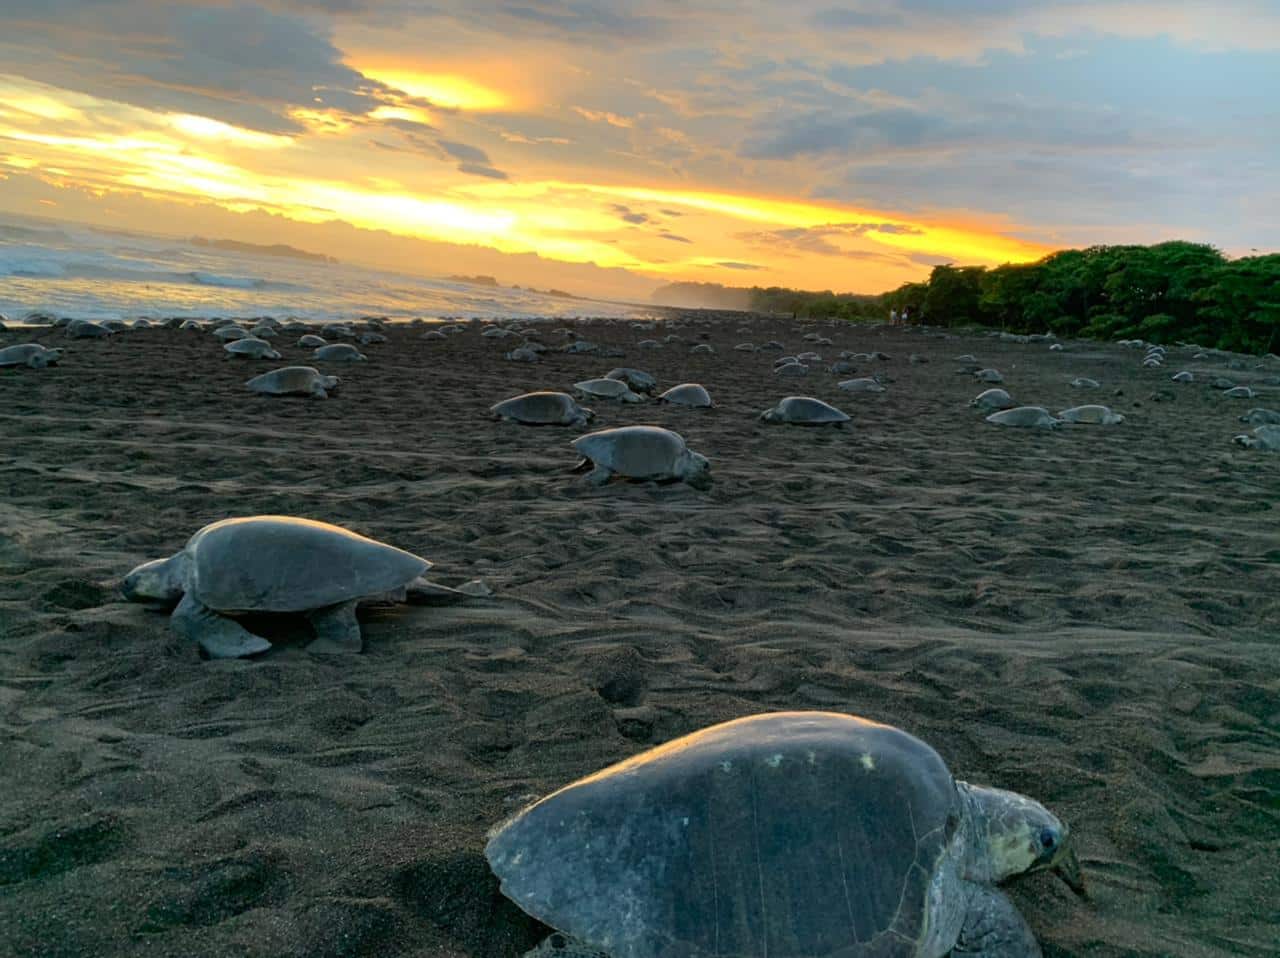 Ecovolontariat tortues Costa Rica